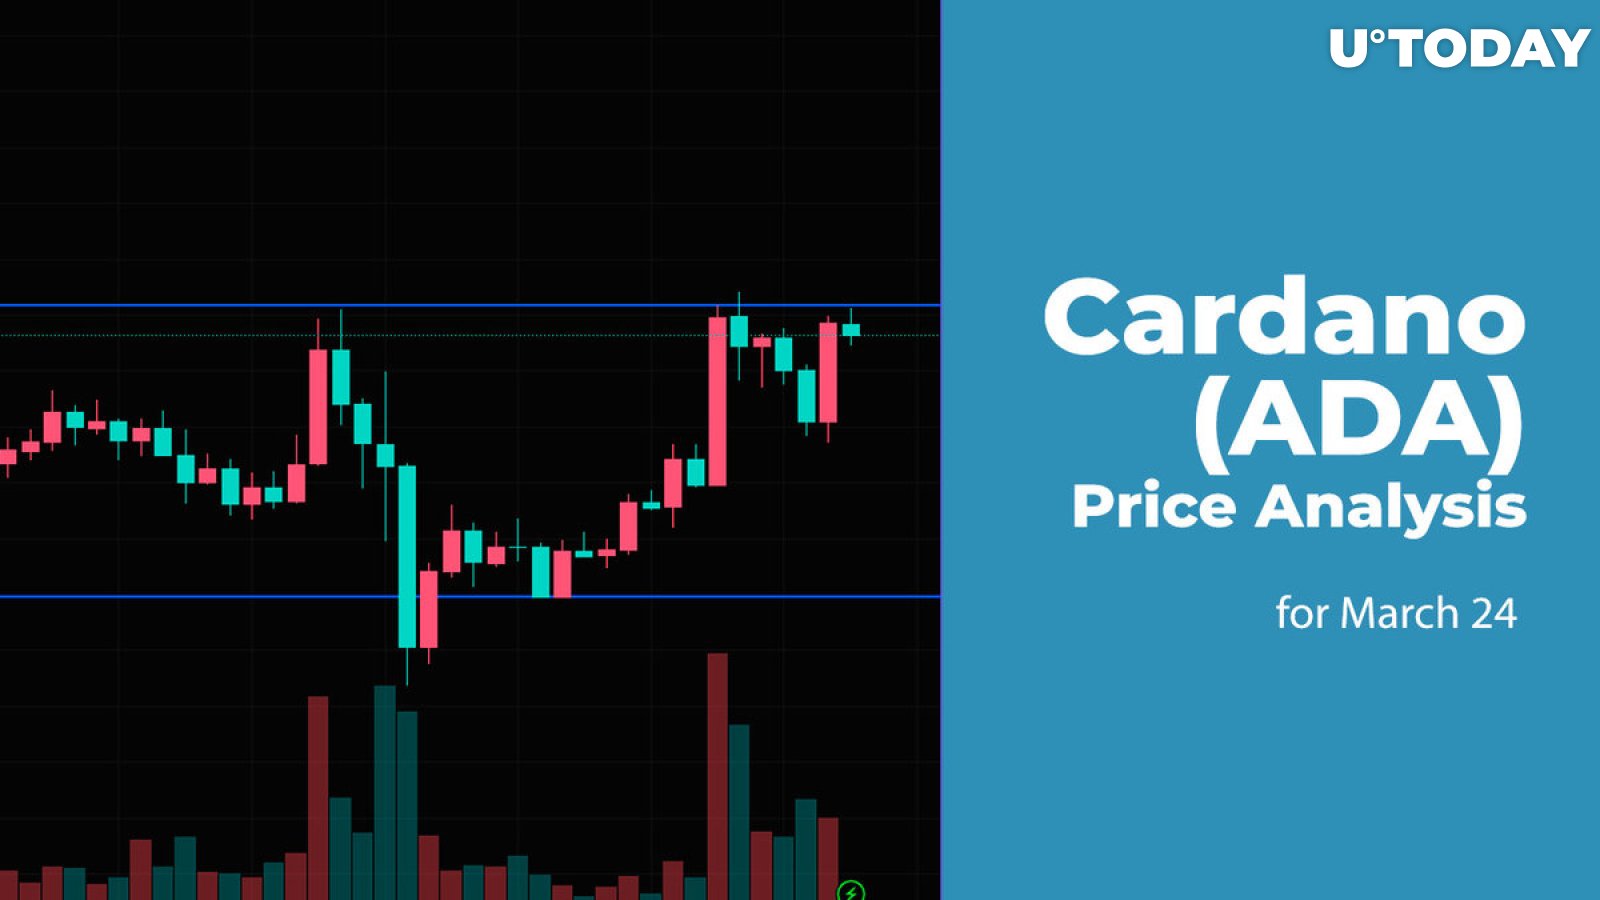 Cardano (ADA) Price Analysis for March 24